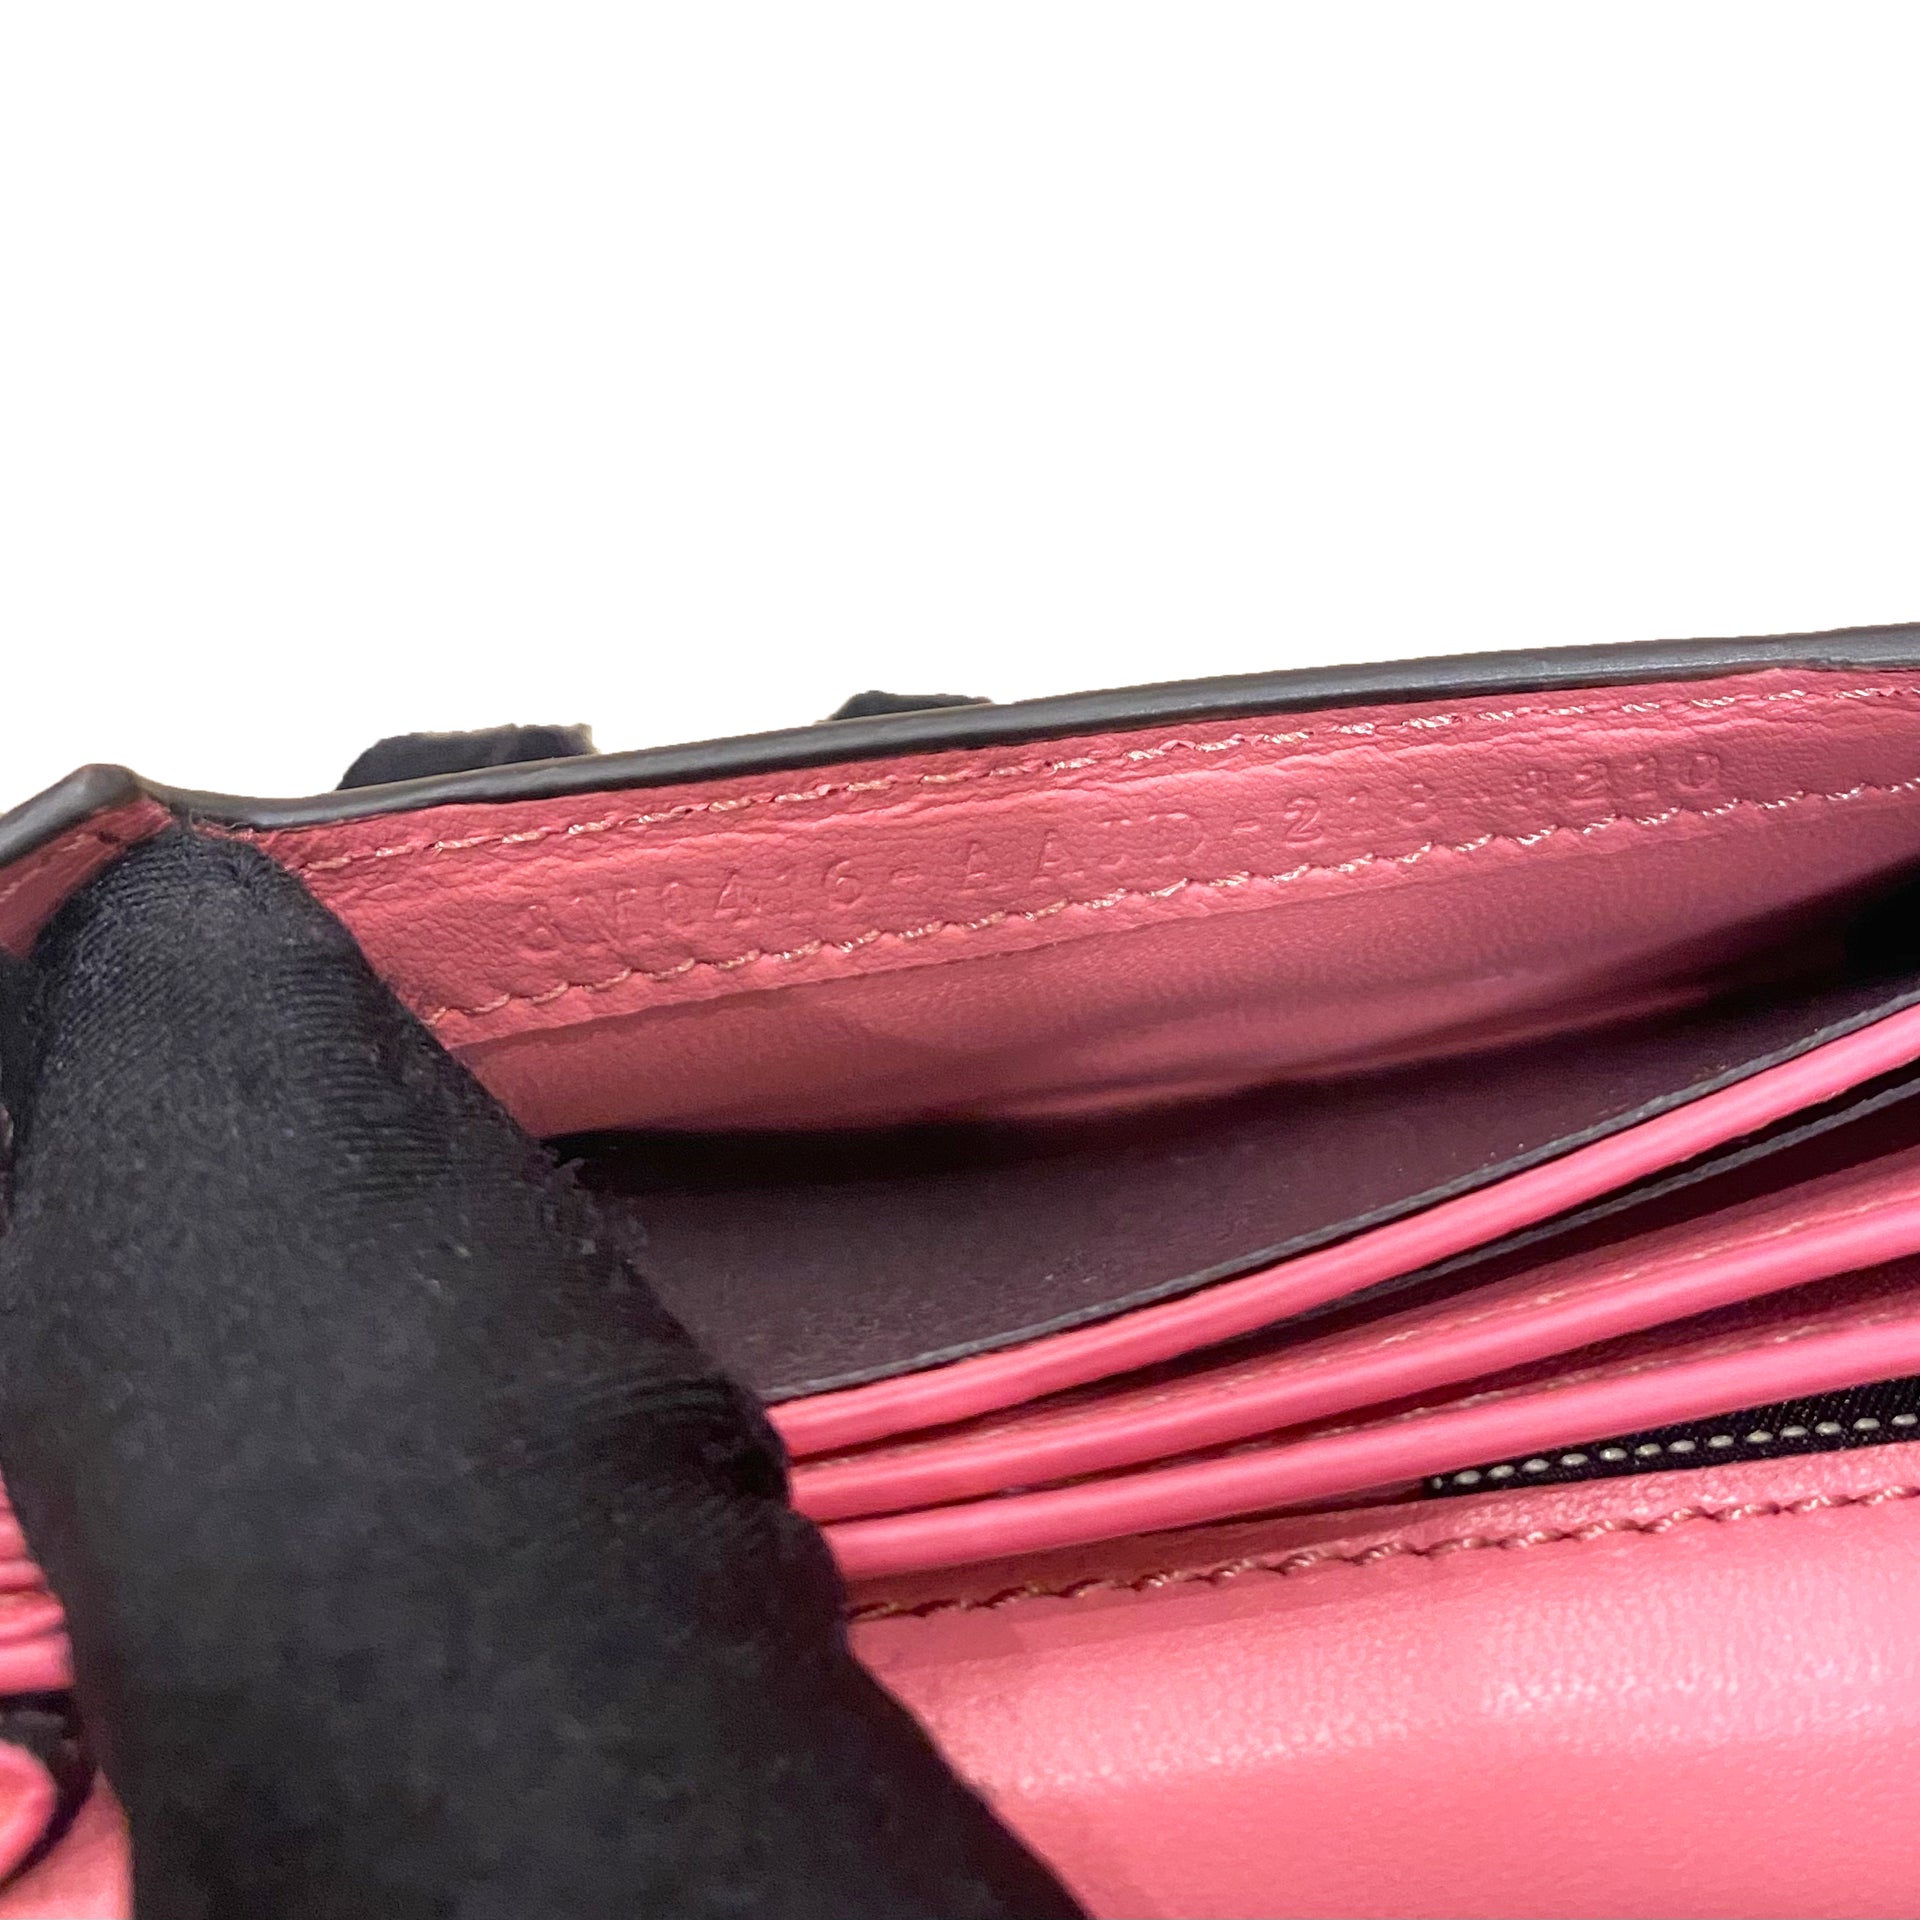 Baguette Continental Wallet With Chain - Pink FF nappa leather wallet